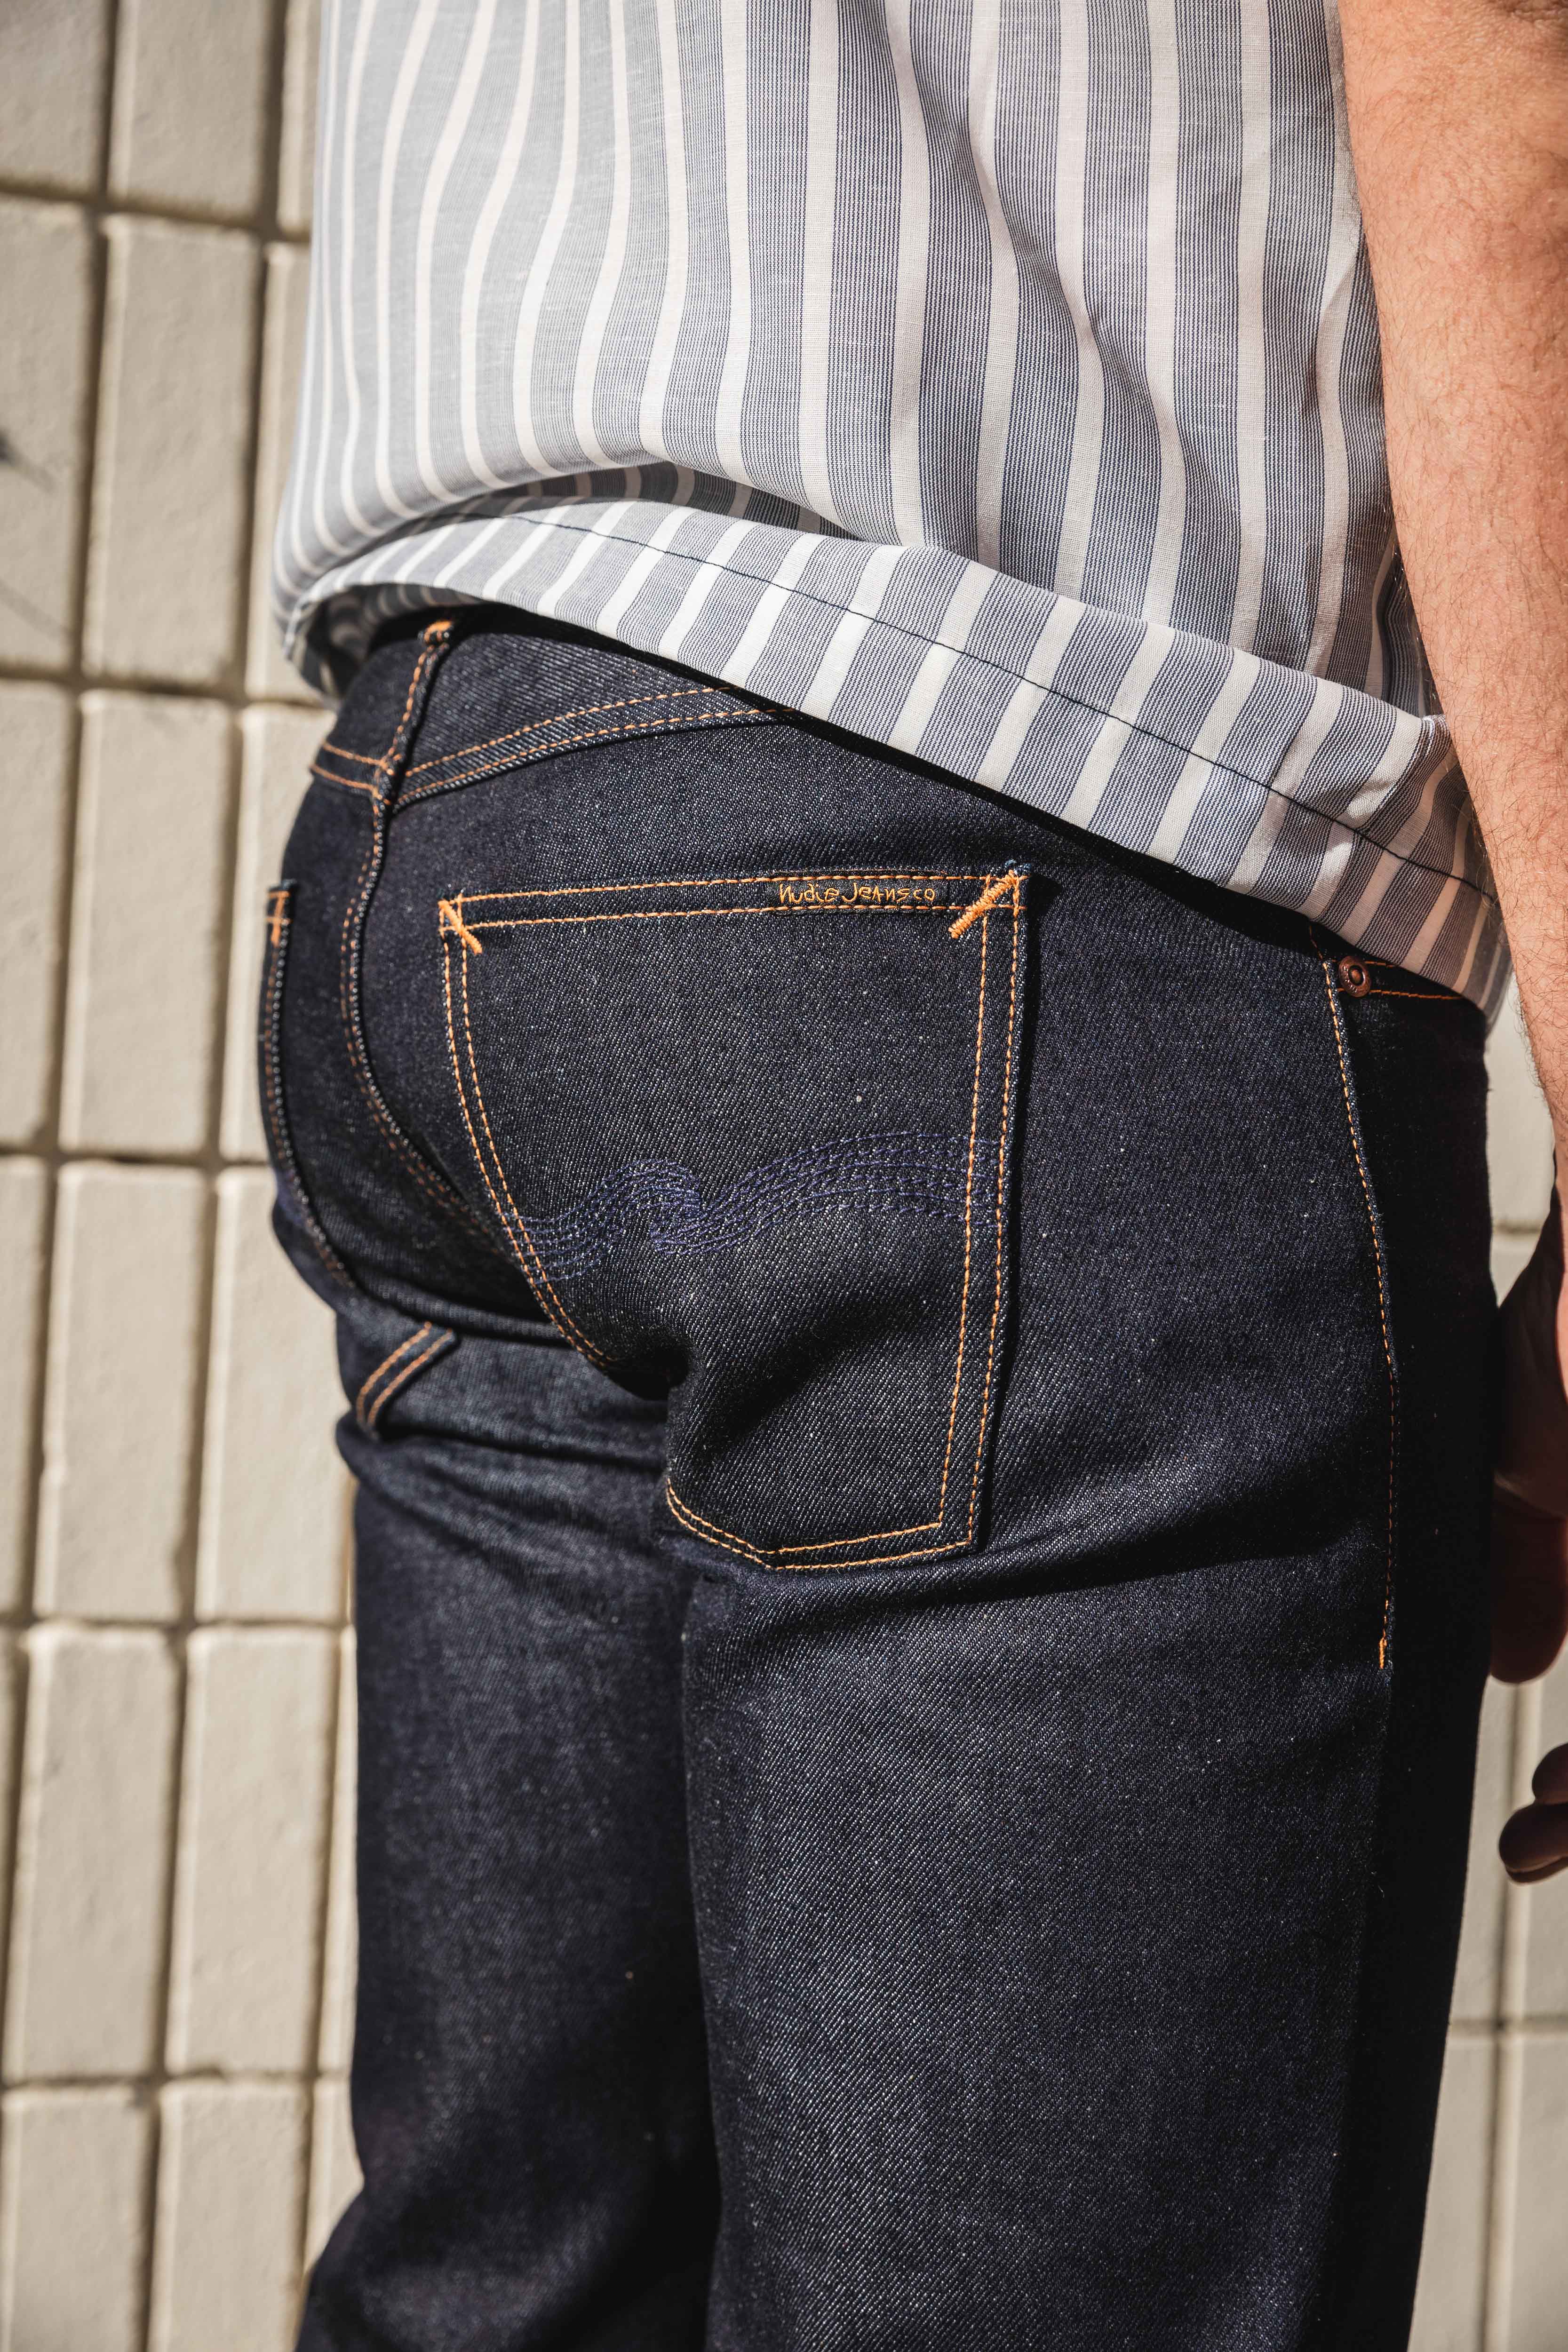 Nudie - Gritty Jackson - Dry Maze Selvage